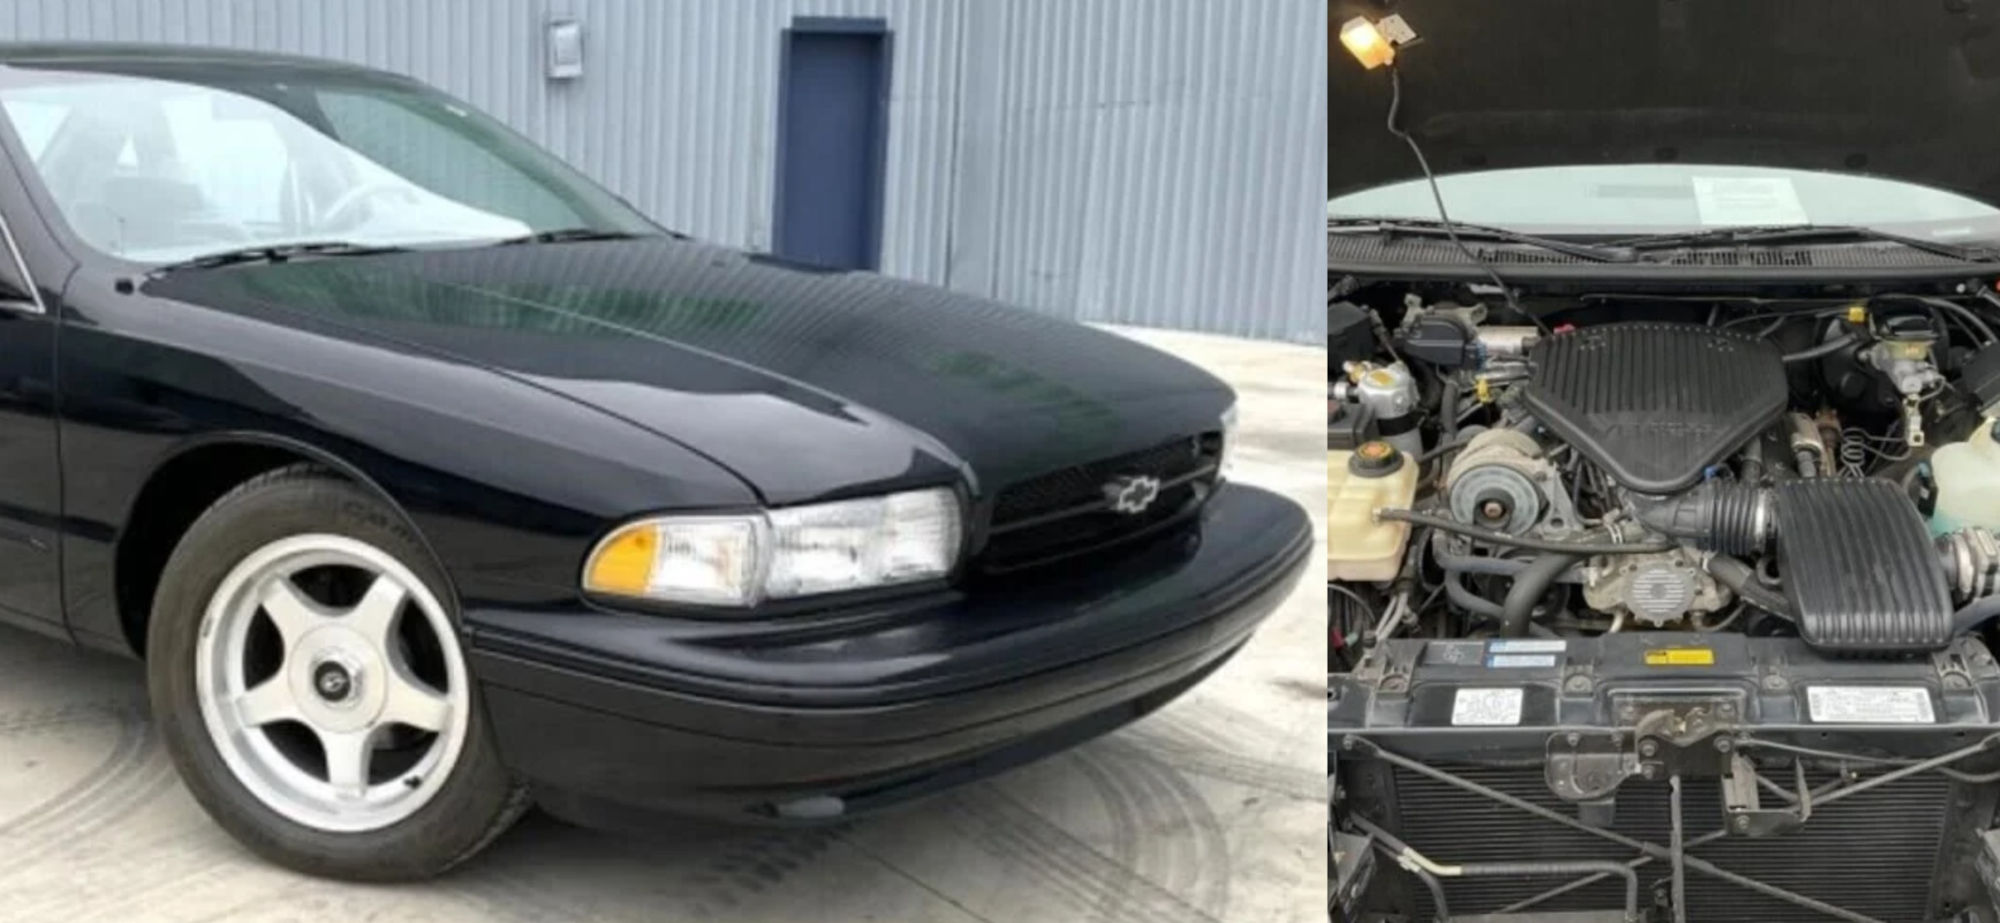 This 1996 Chevy Impala SS is in pristine condition